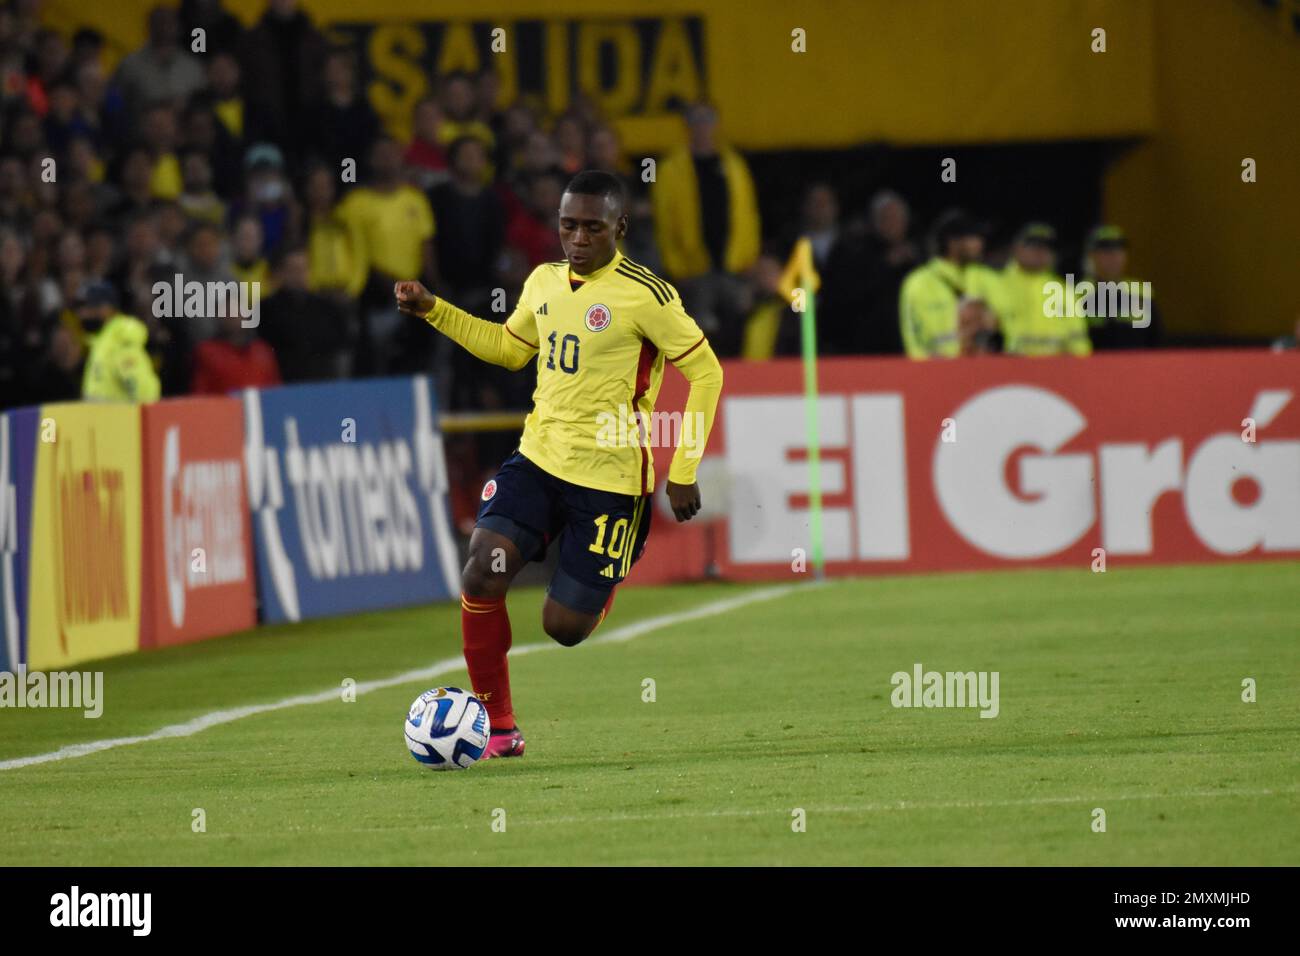 Colombia's Alexis Castillo during the CONMEBOL South American Tournament match between Colombia Vs Uruguay, in Bogota, Colombia on January 31, 2023. Photo by: Cristian Bayona/Long Visual Press Stock Photo